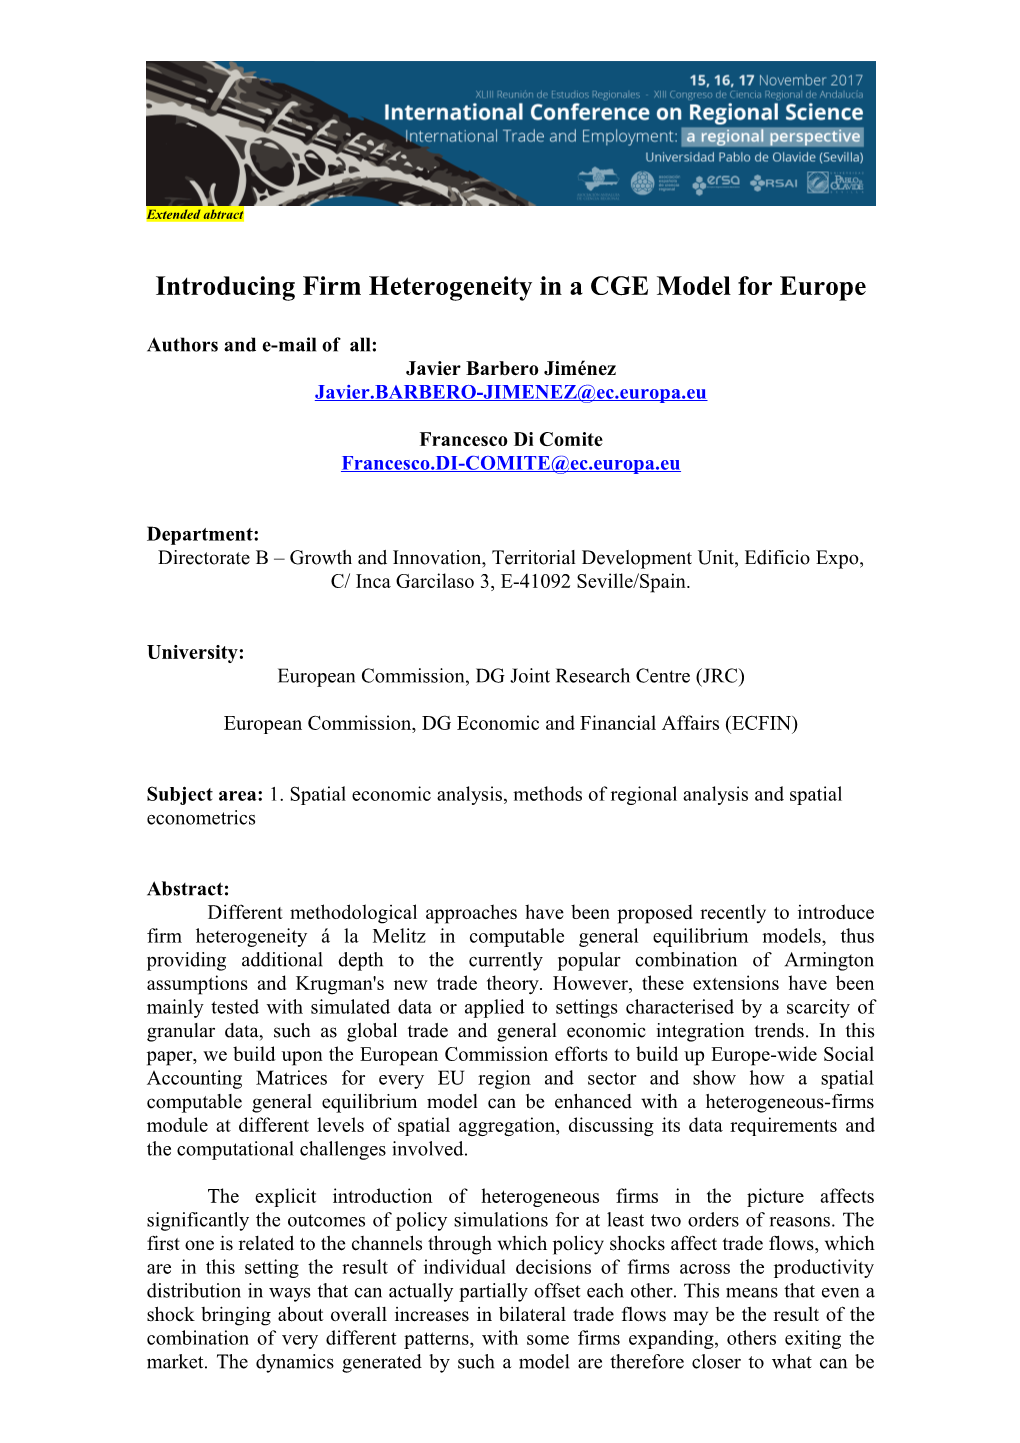 Introducing Firm Heterogeneity in a CGE Model for Europe